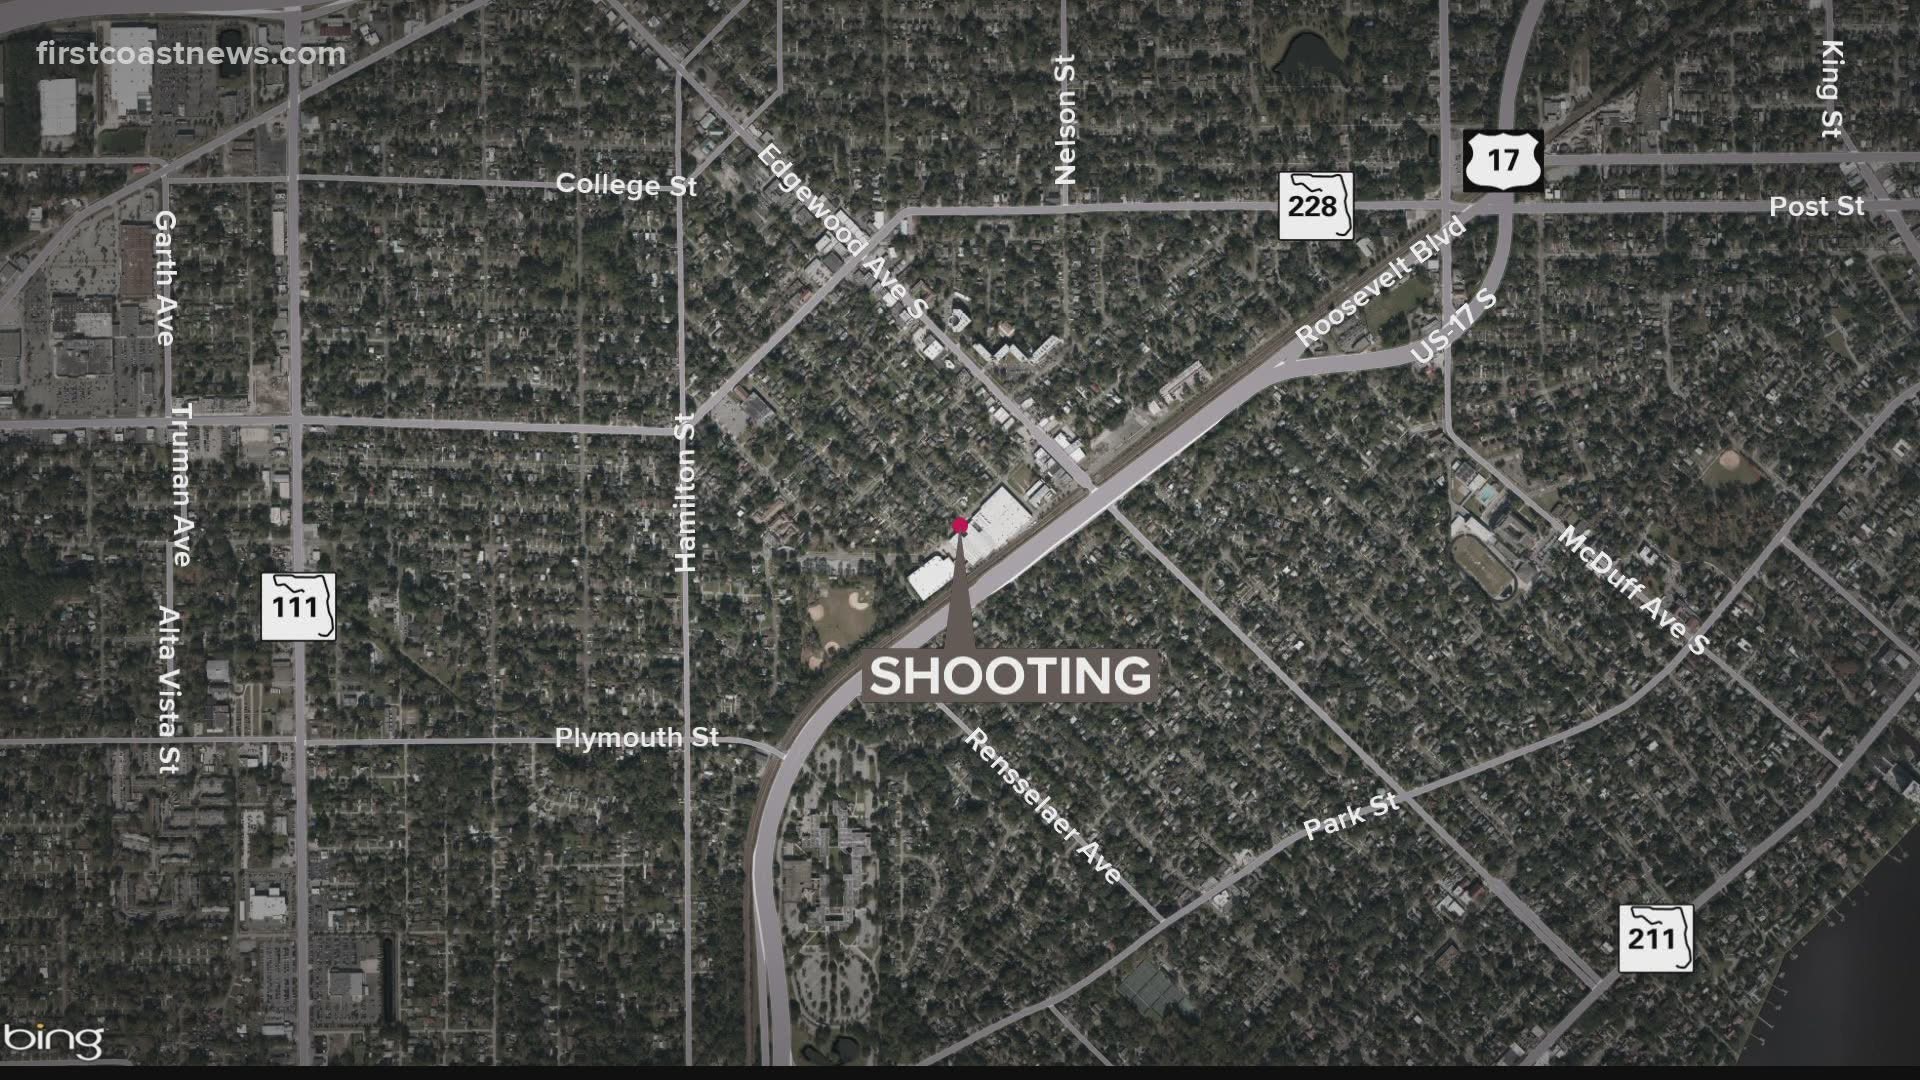 JSO said the shooting happened in the 3600 block of Mayflower Street.